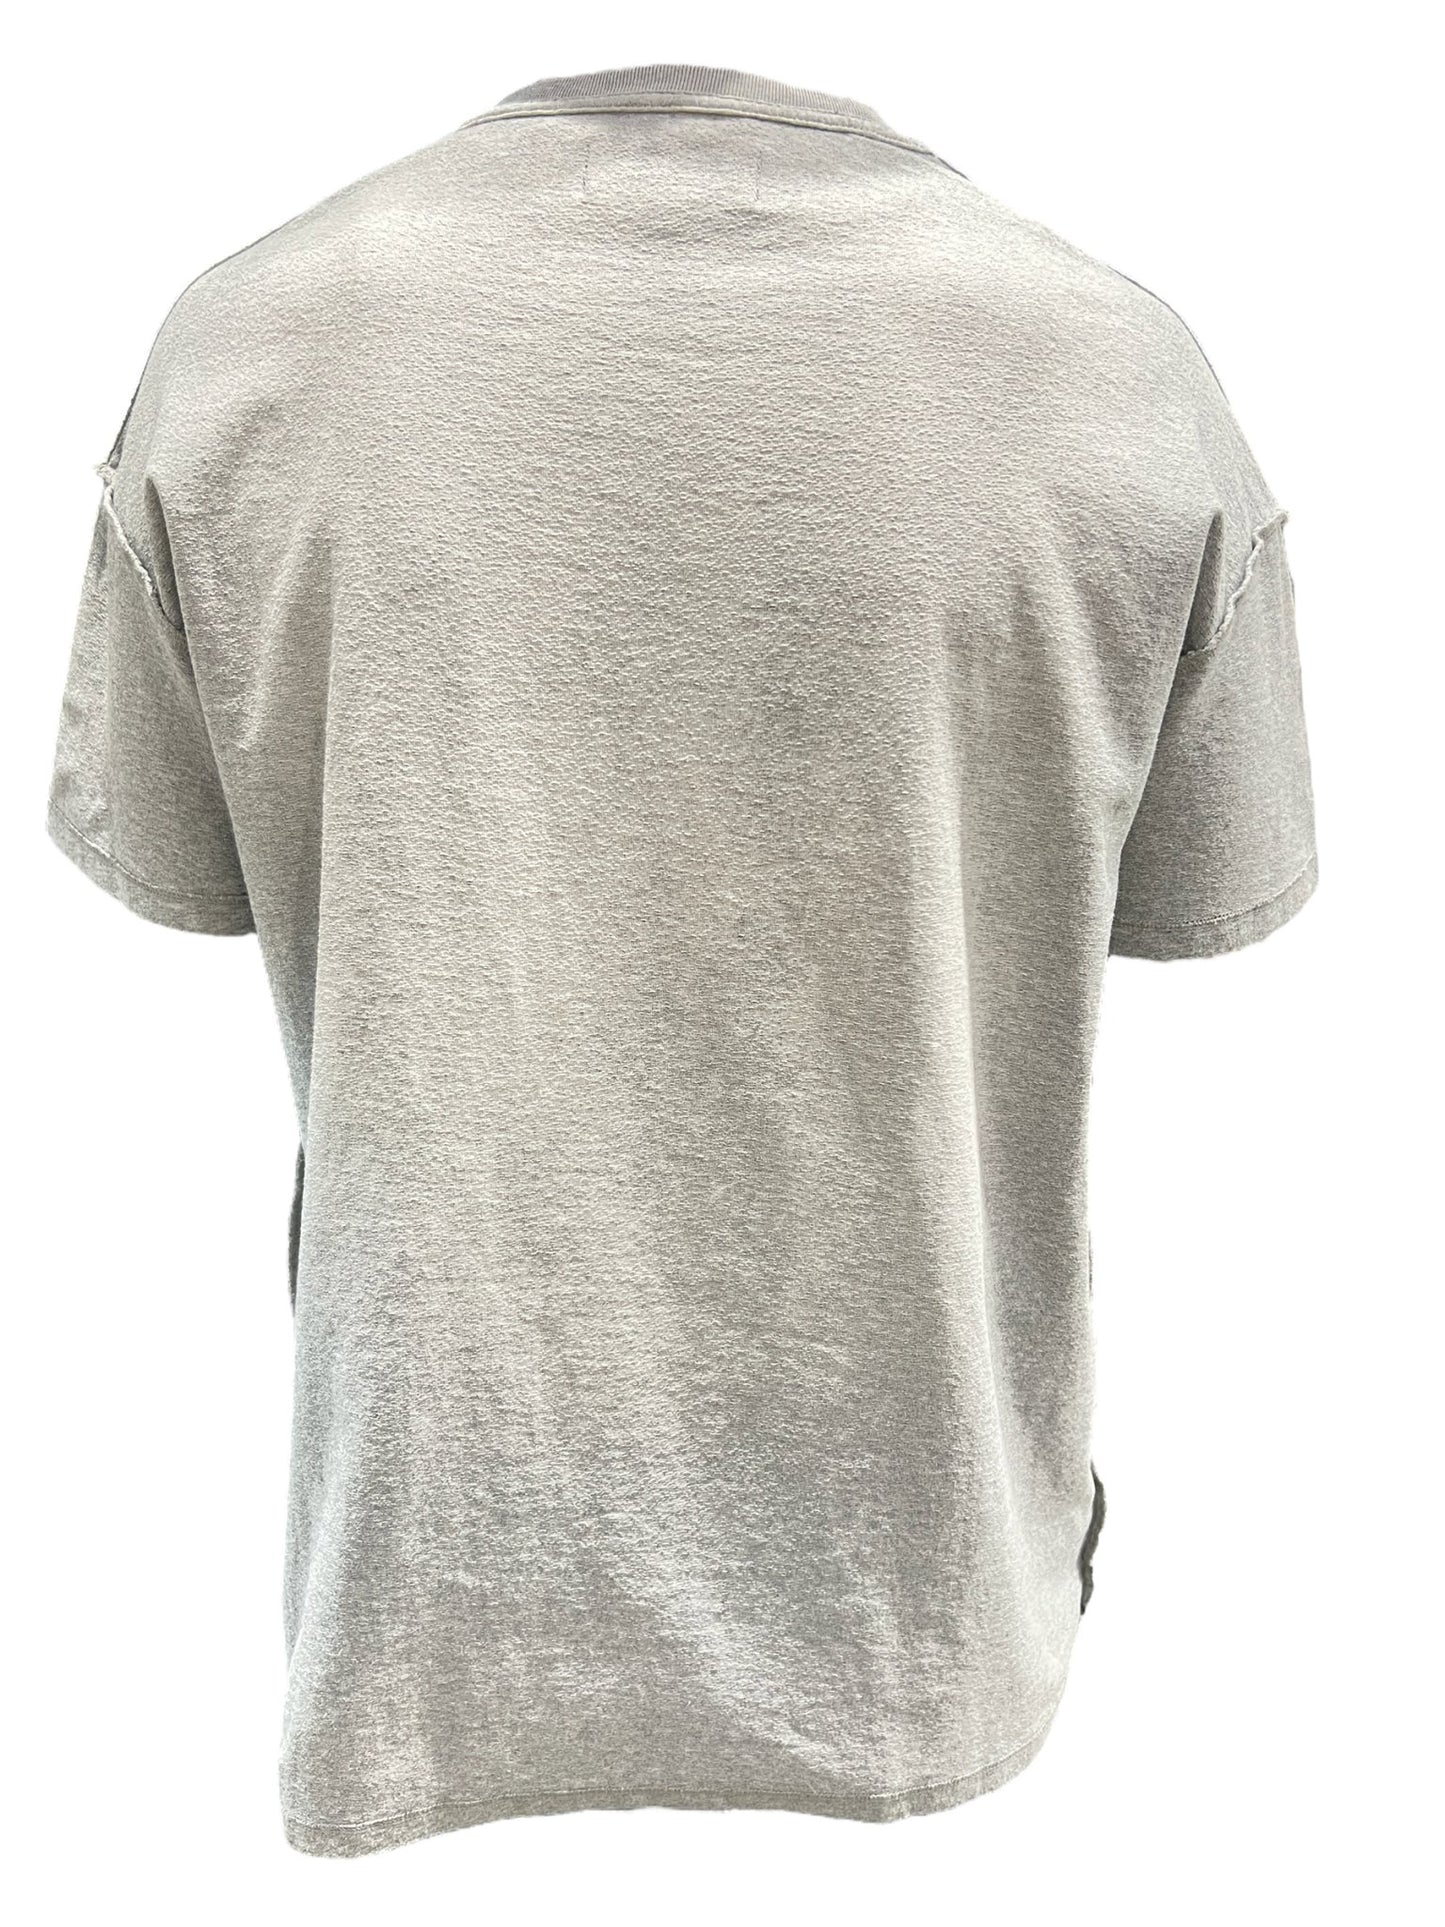 The back of a PURPLE BRAND P101-JFHG224 TEXTURED INSIDE OUT TEE HEATHER on a white background.